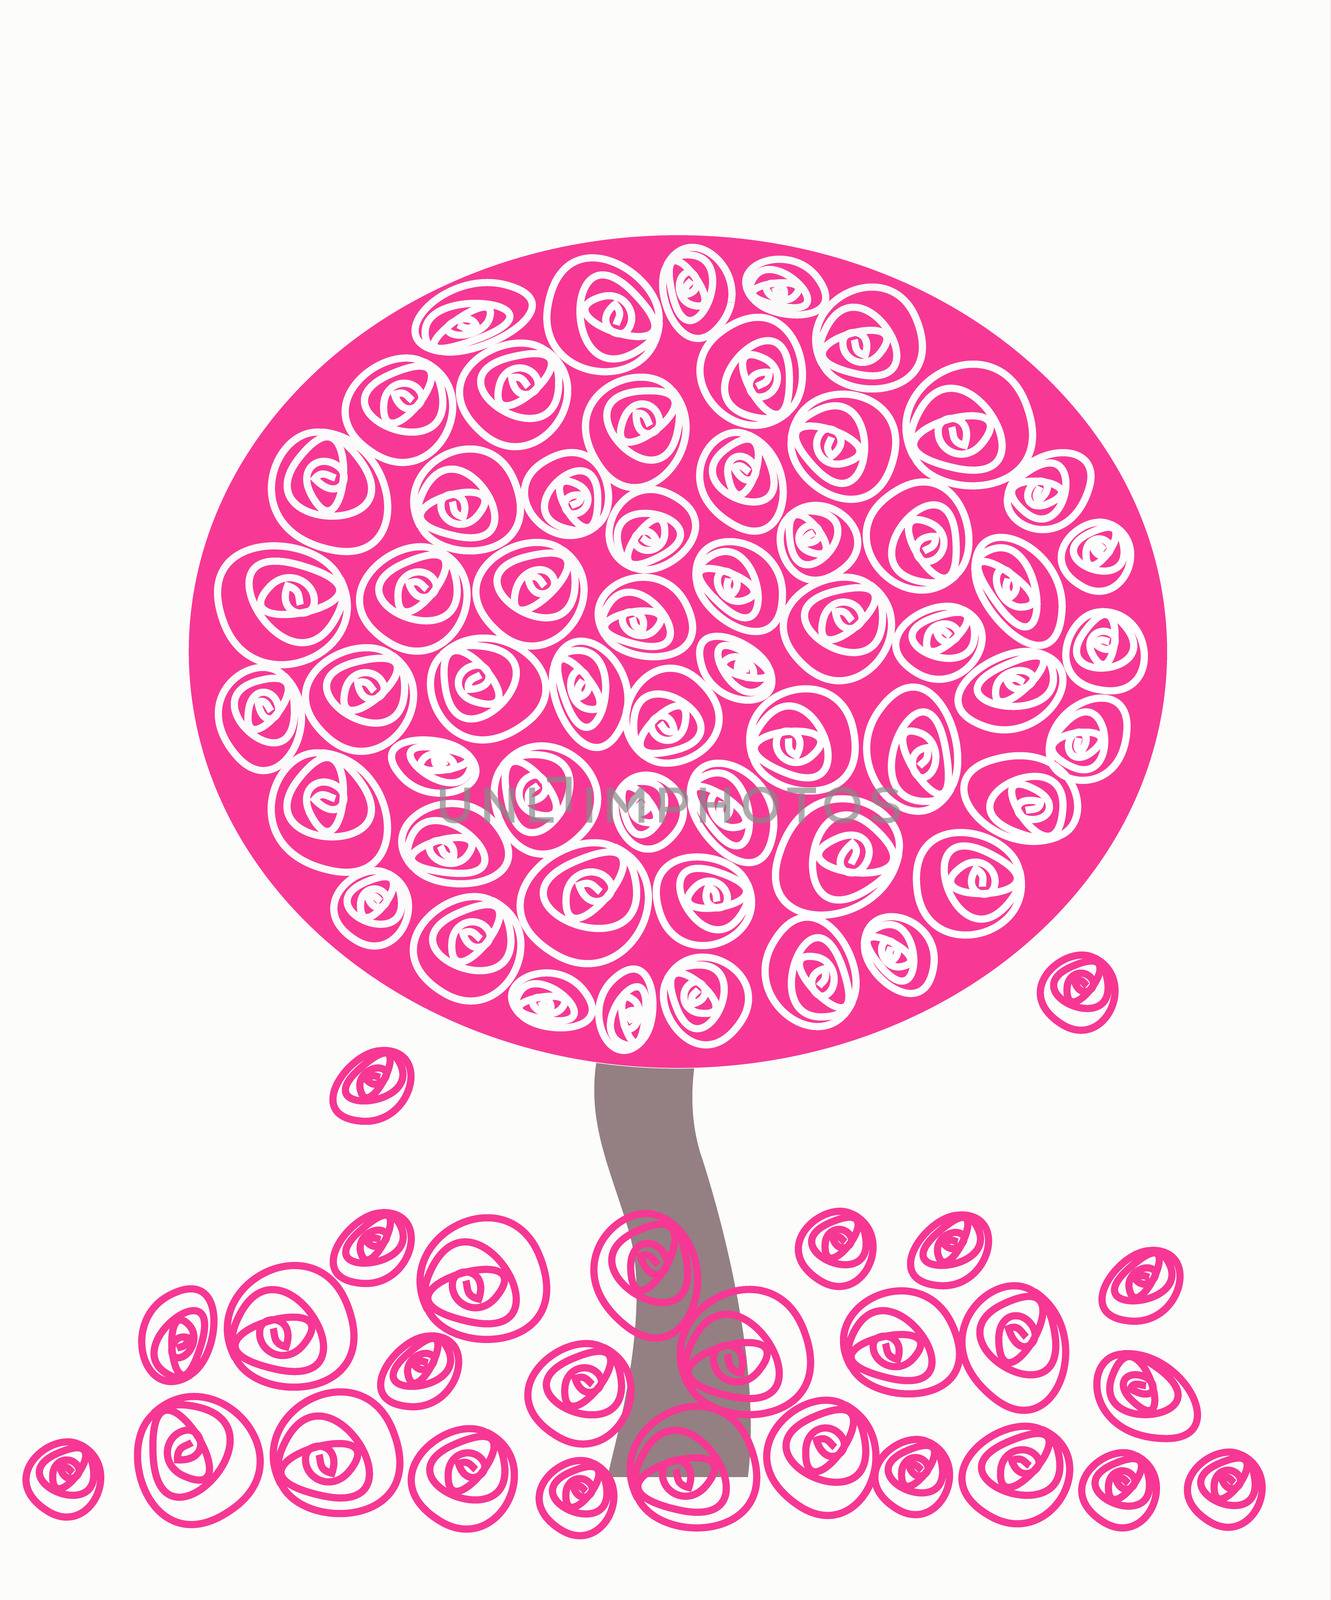 Abstract stylized tree. Vector illustration by Dr.G